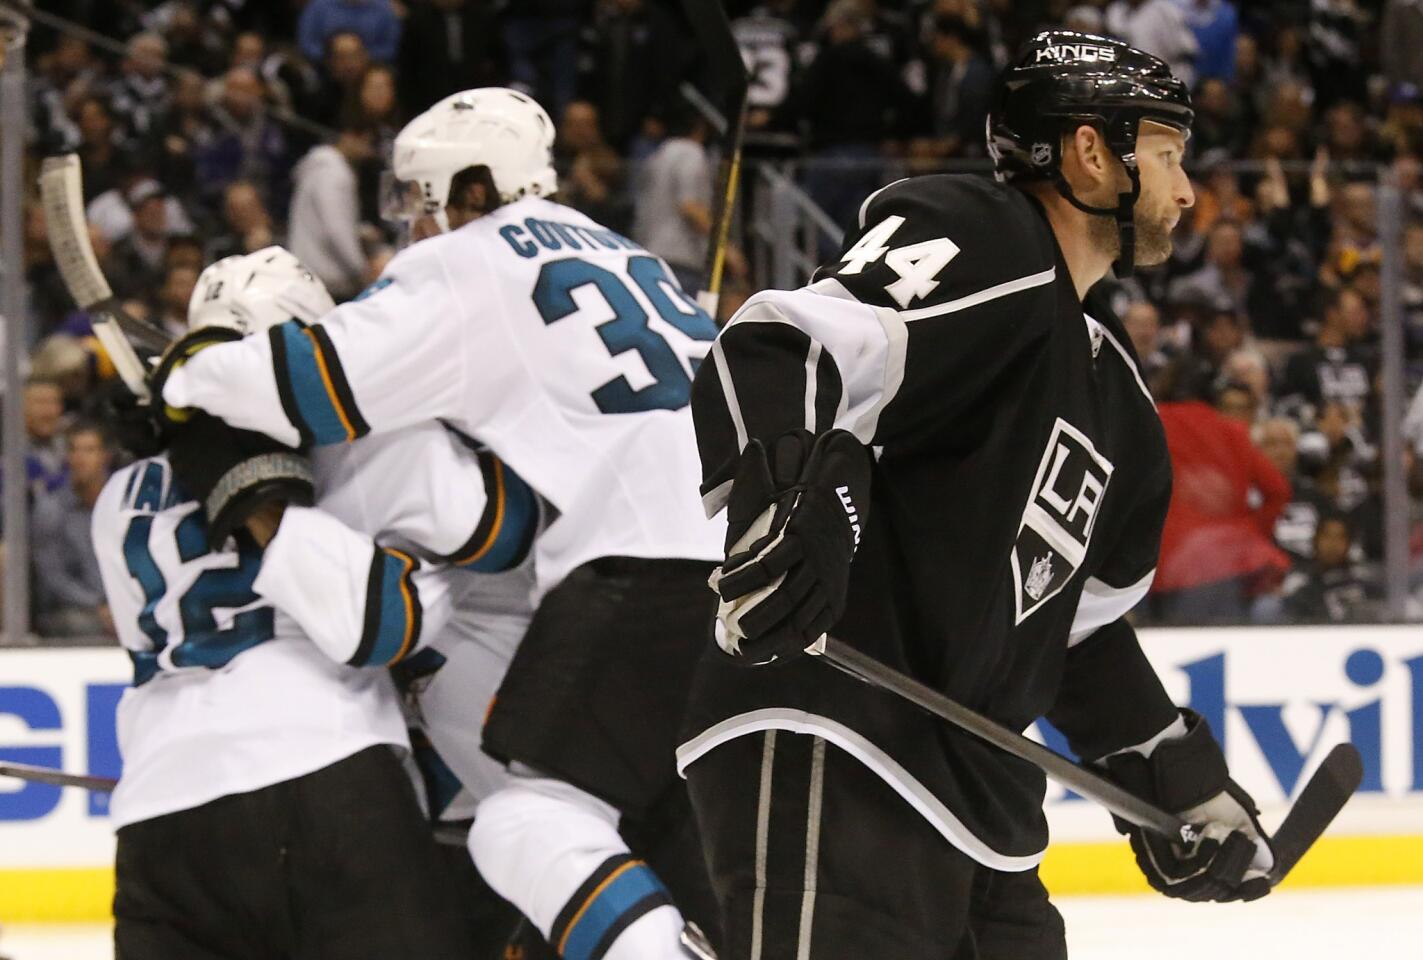 Kings defenseman Robyn Regehr skates back to the bench as the San Jose Sharks celebrate Patrick Marleau's winning goal in overtime of a 4-3 win in Game 3 of the Western Conference quarterfinals at Staples Center.